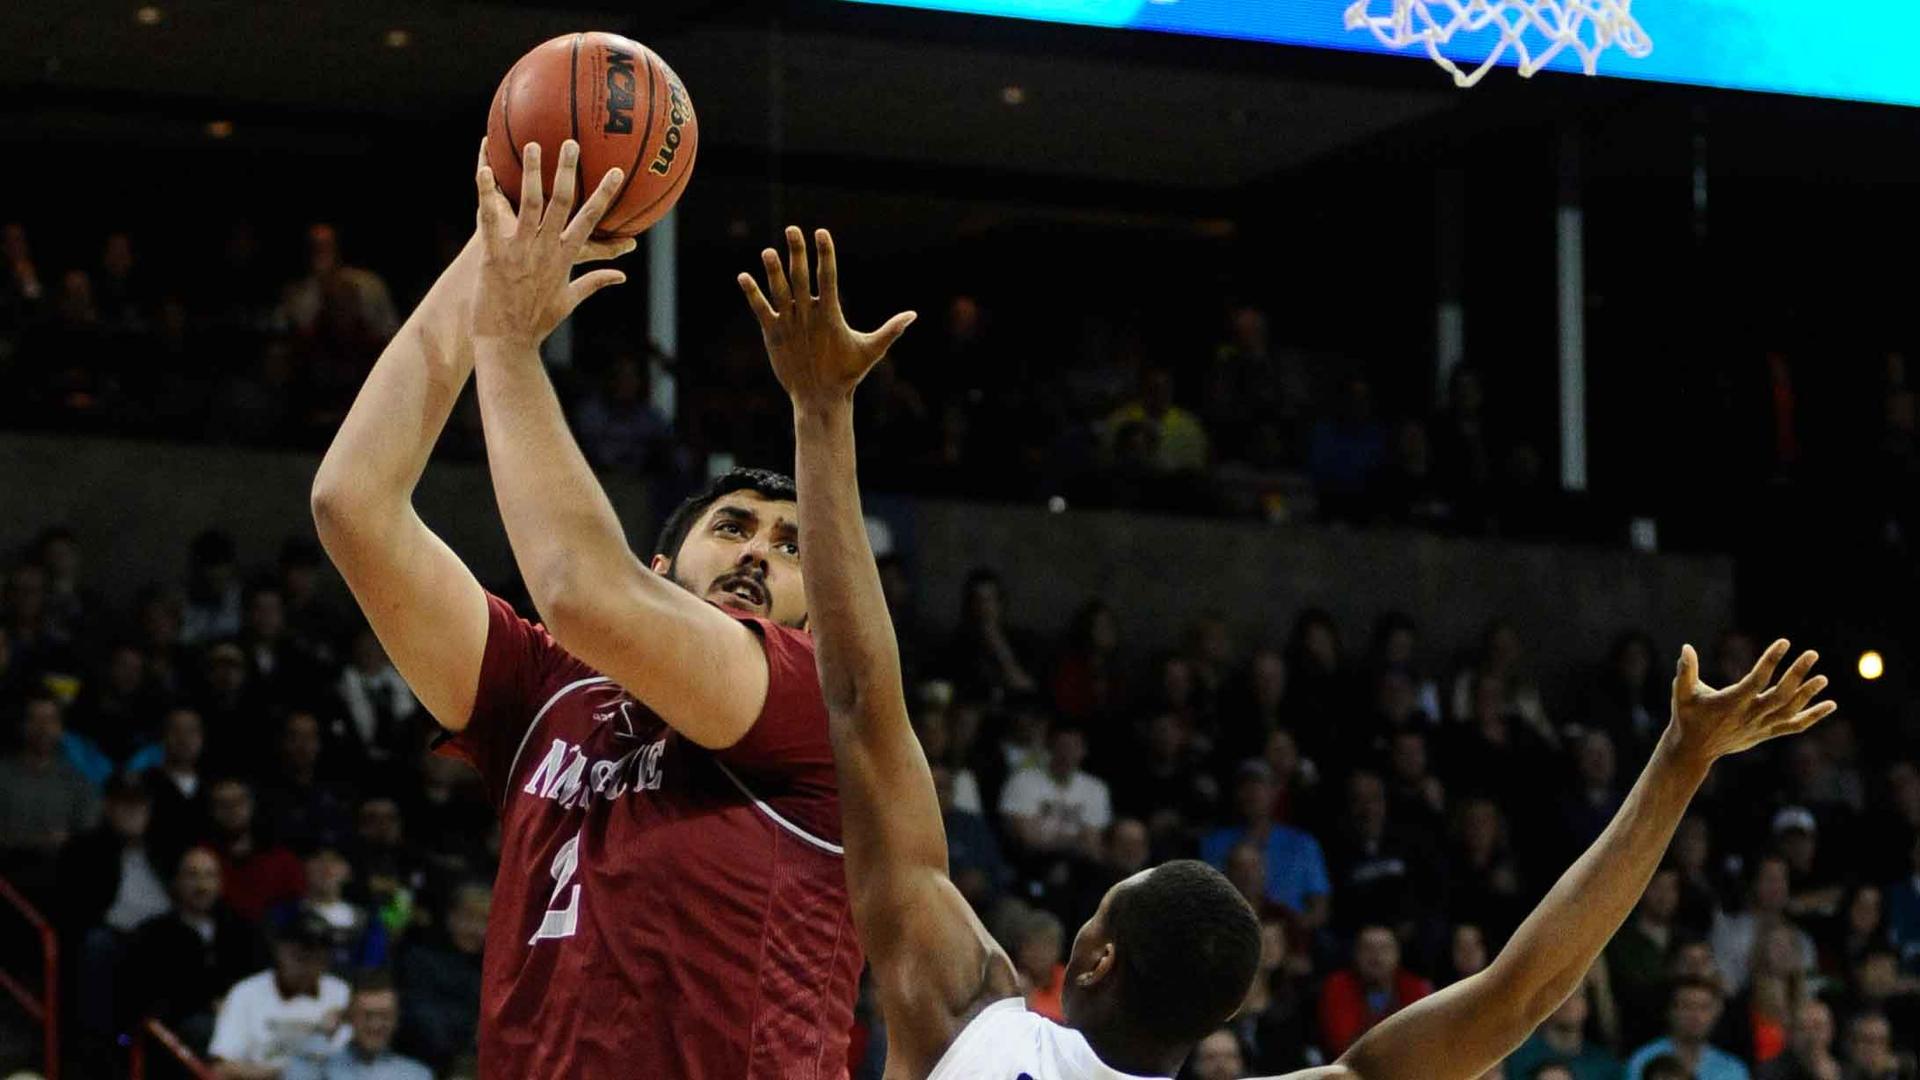 Sim Bhullar playing for the New Mexico State Aggies during the 2014 NCAA Tournament. Bhullar signed a 10-day contract with the Sacramento Kings in 2015, becoming the first player of Indian descent in the league.